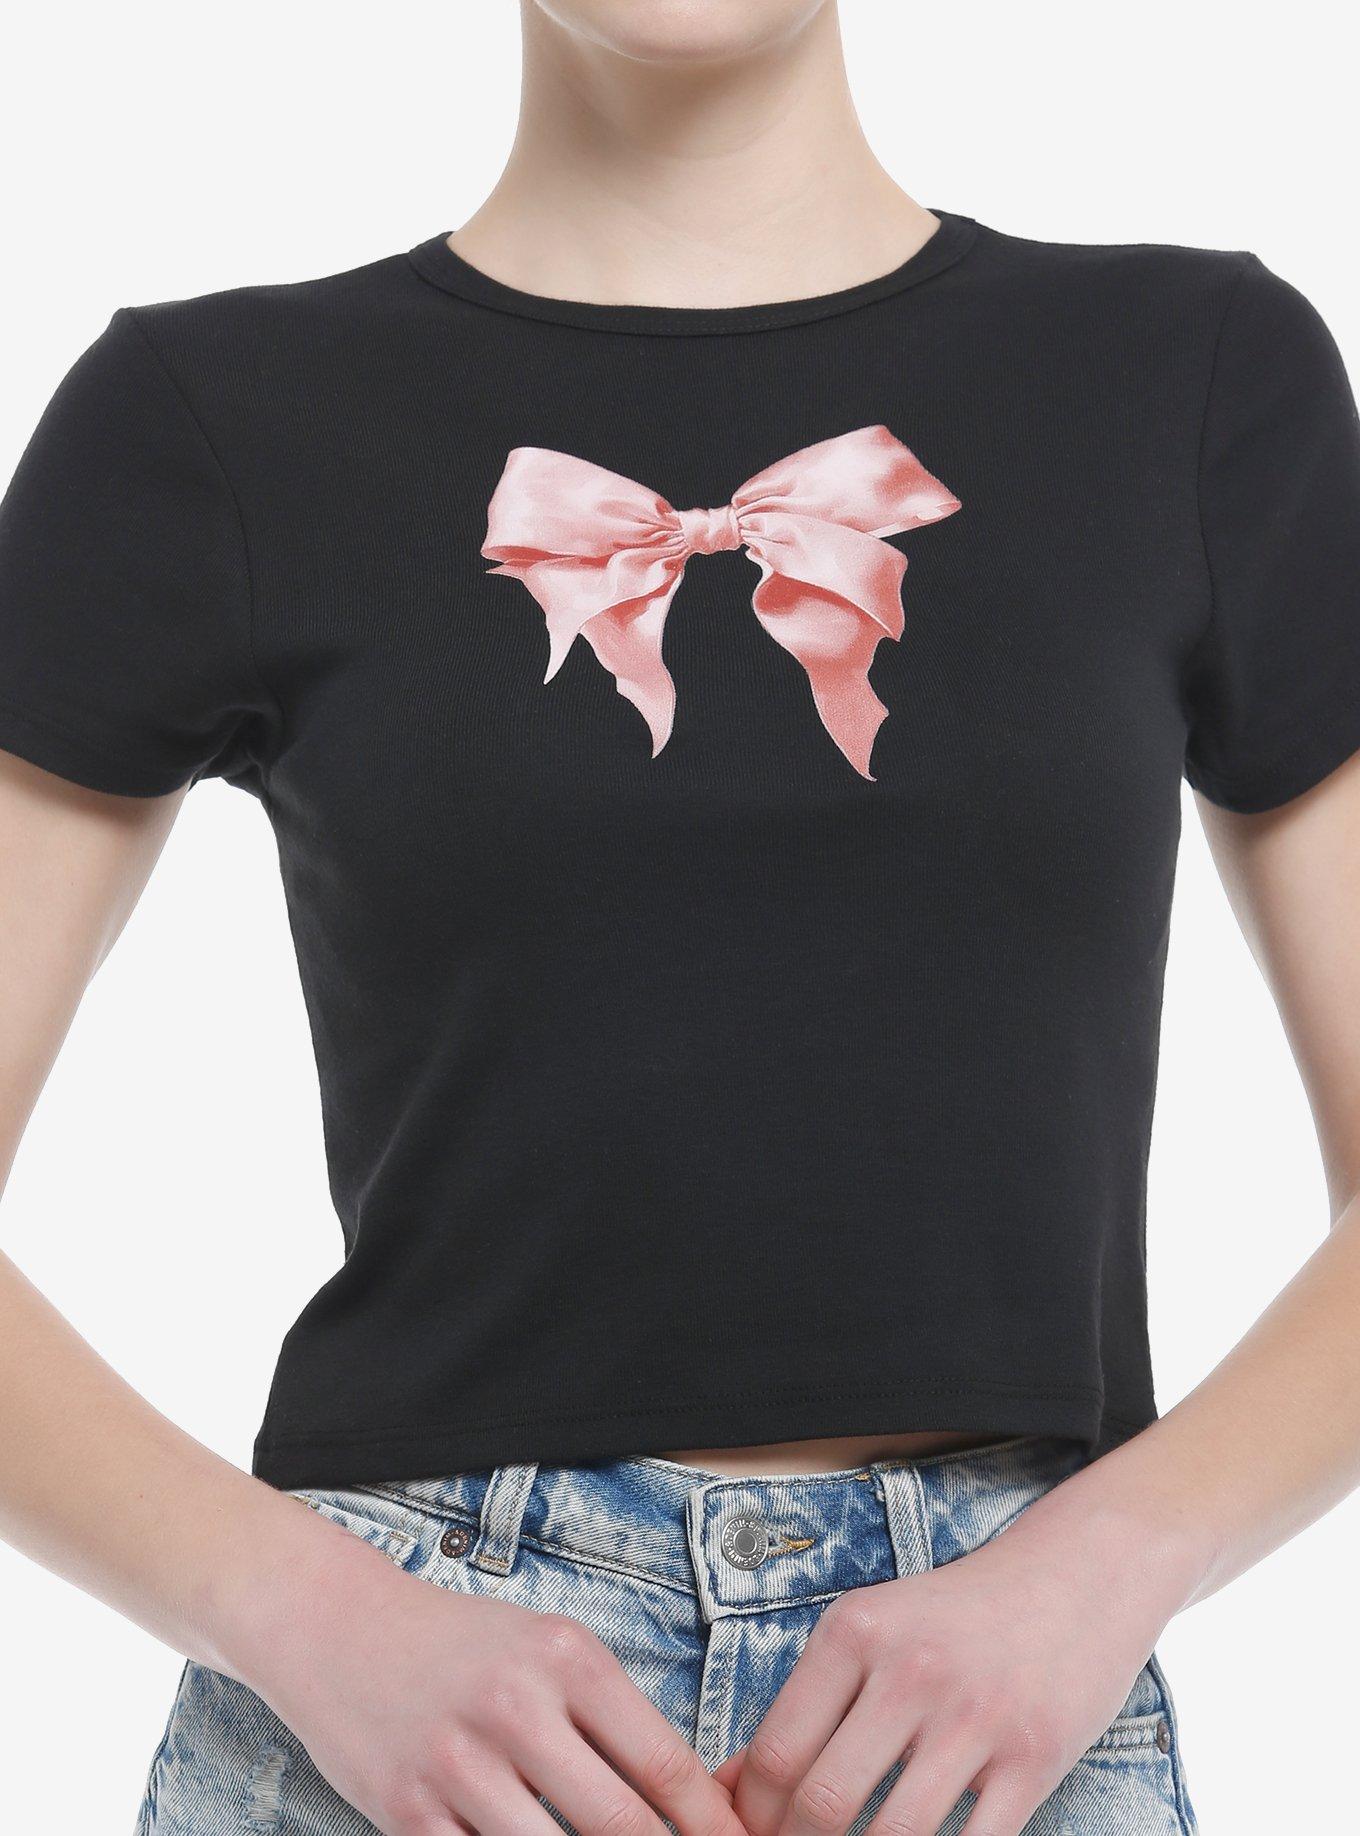 Pink Bow Girls Baby T-Shirt